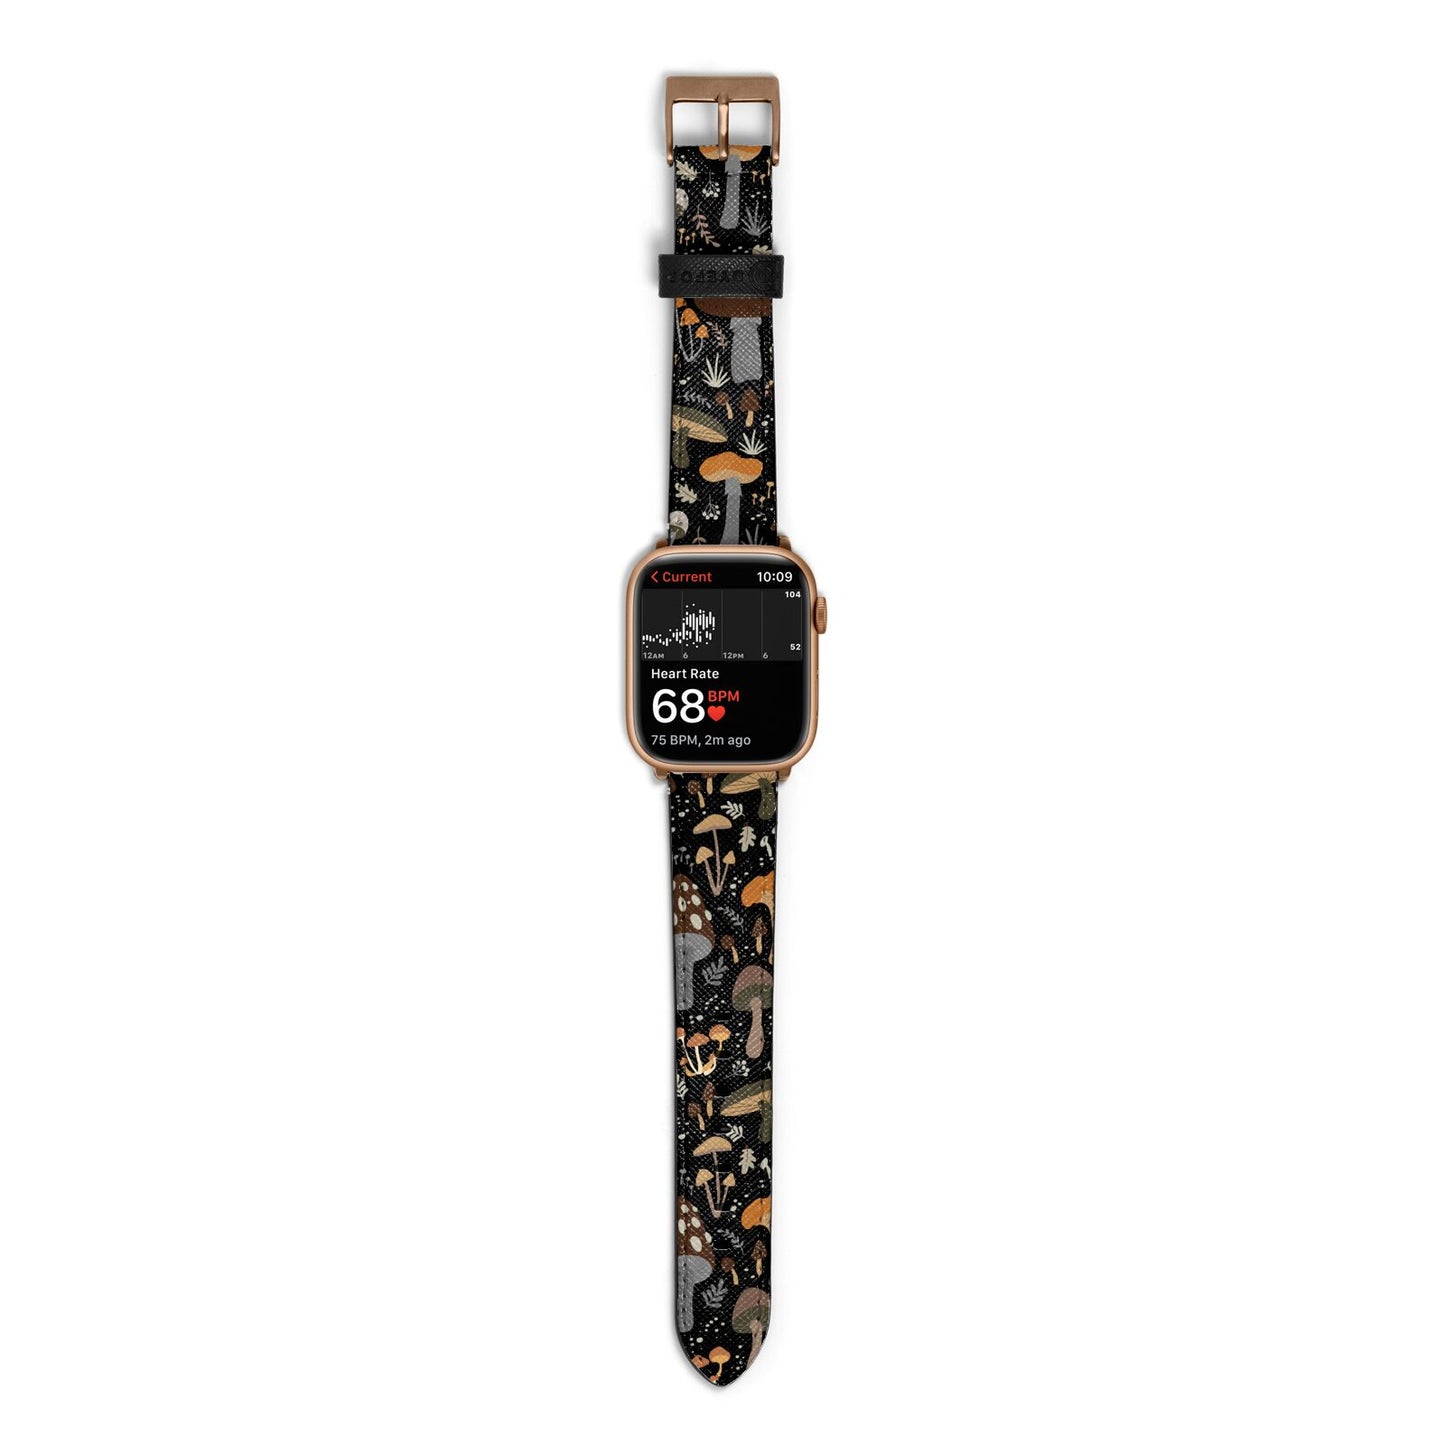 Mushroom Apple Watch Strap Size 38mm with Gold Hardware